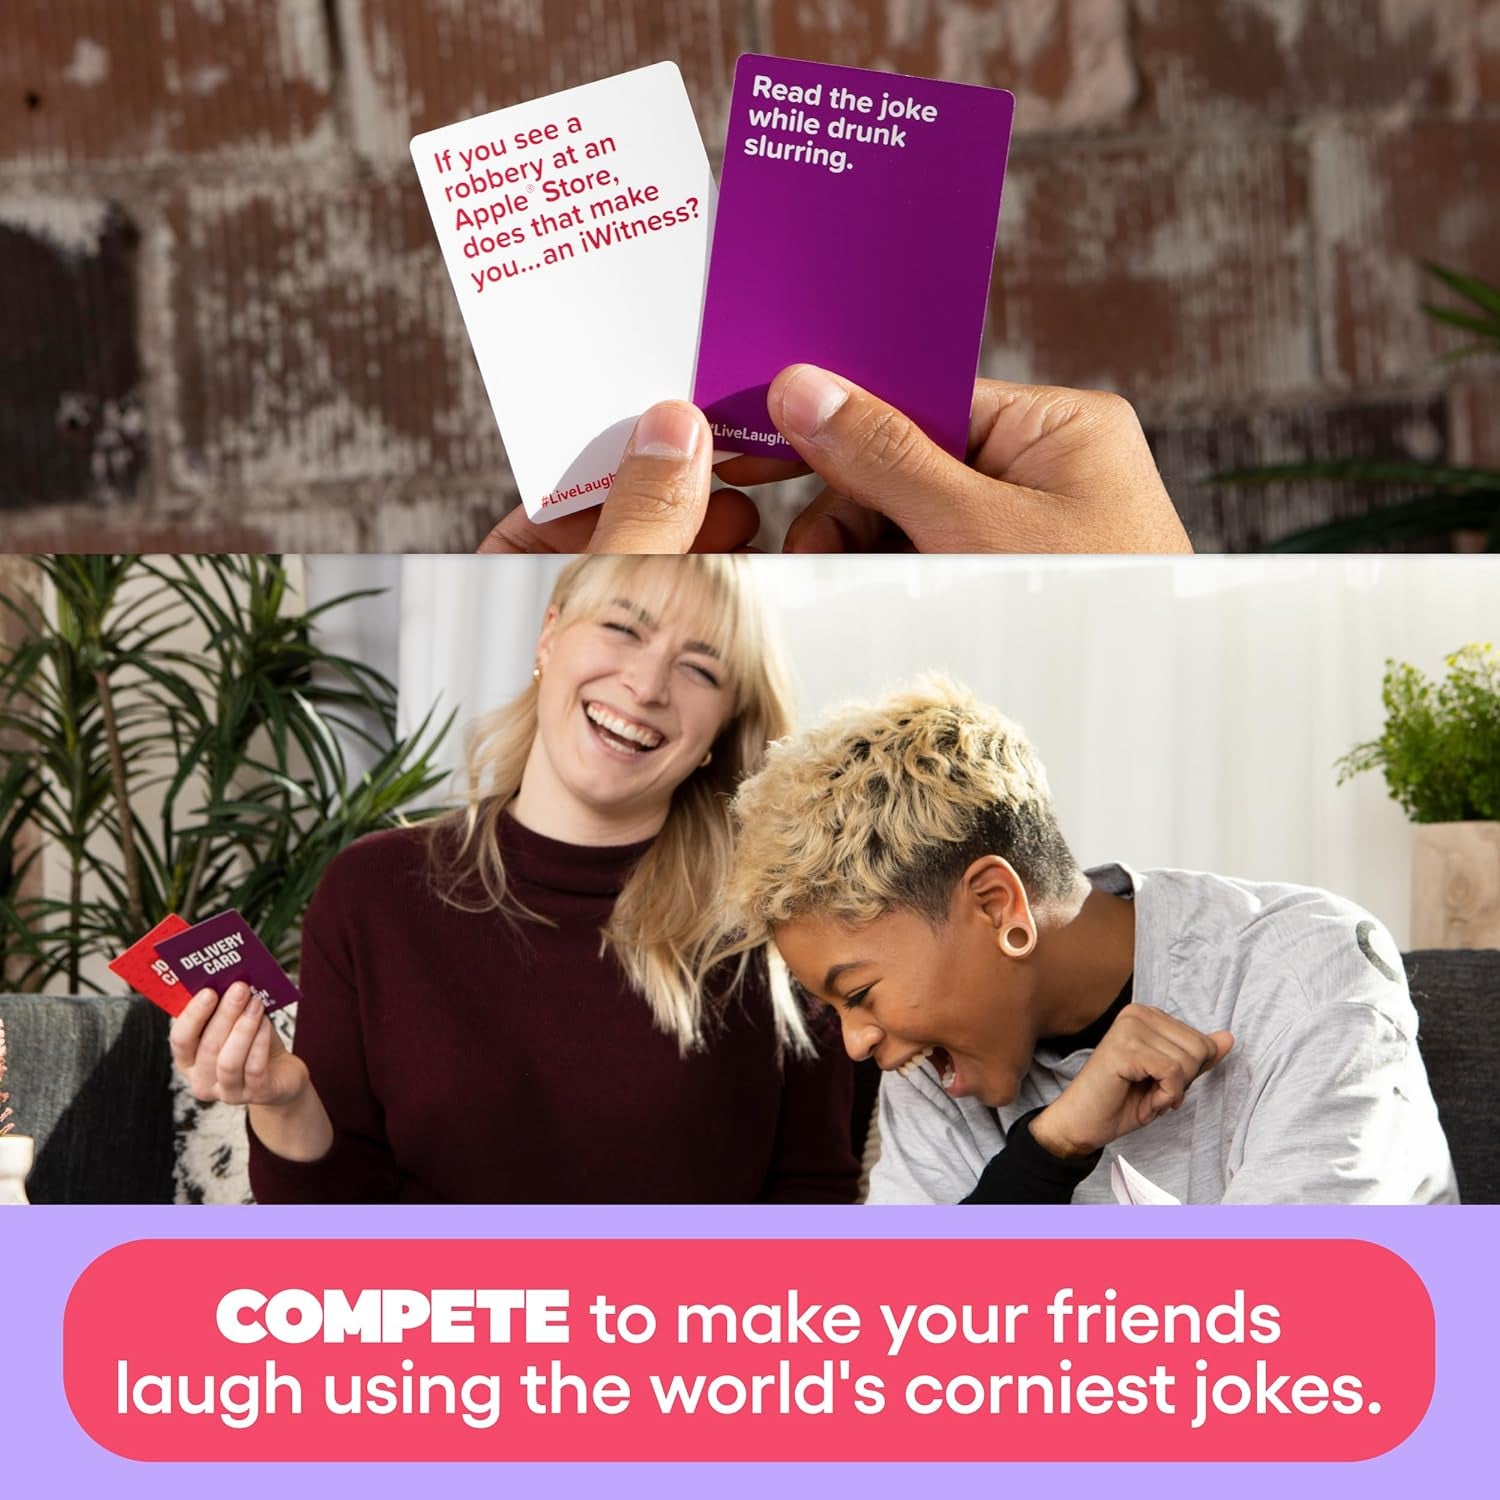 Live Laugh Lose Party Game: Compete to Make Corny Jokes Funny